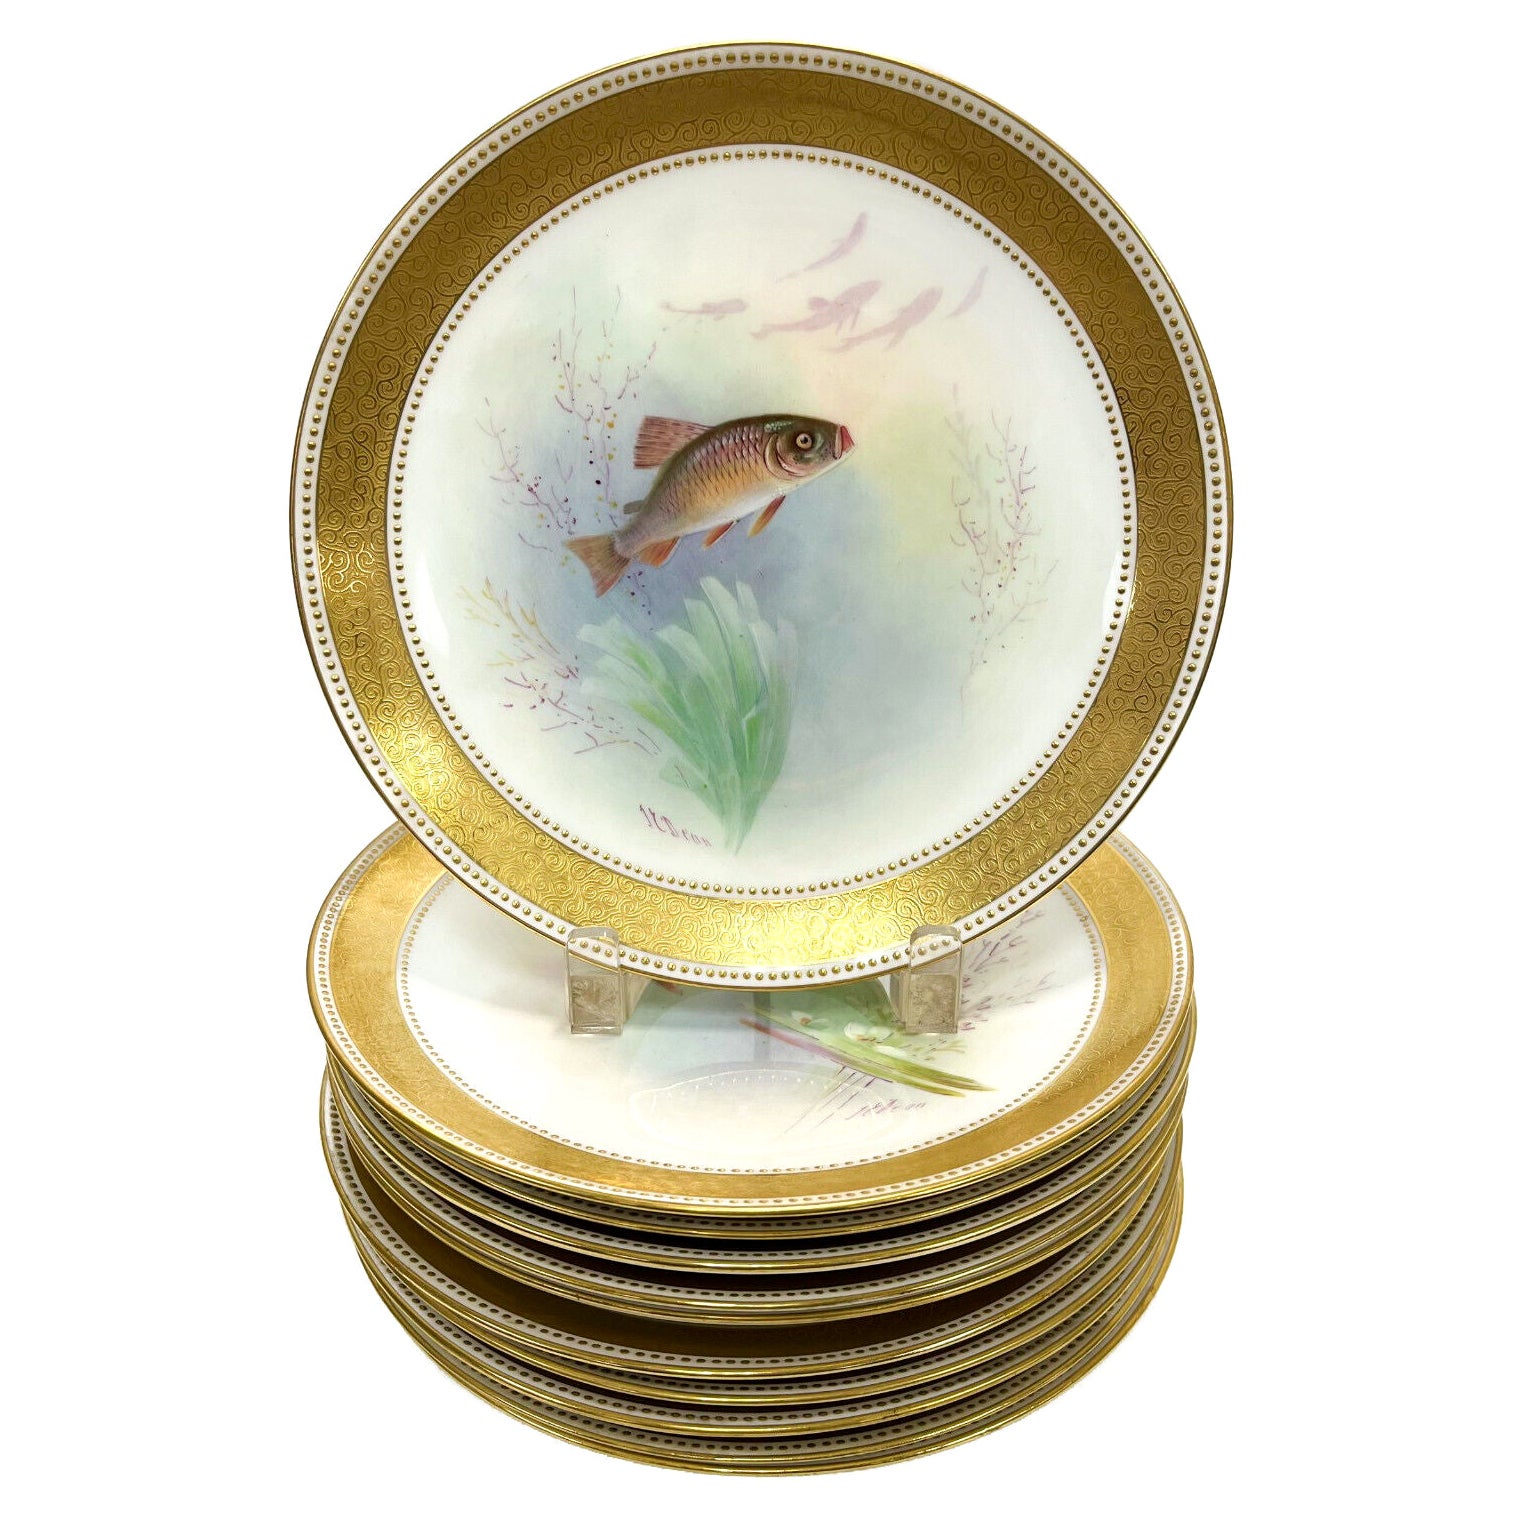 Set of 11 Minton England Porcelain Hand Painted Fish Cabinet Plates, circa 1905 For Sale